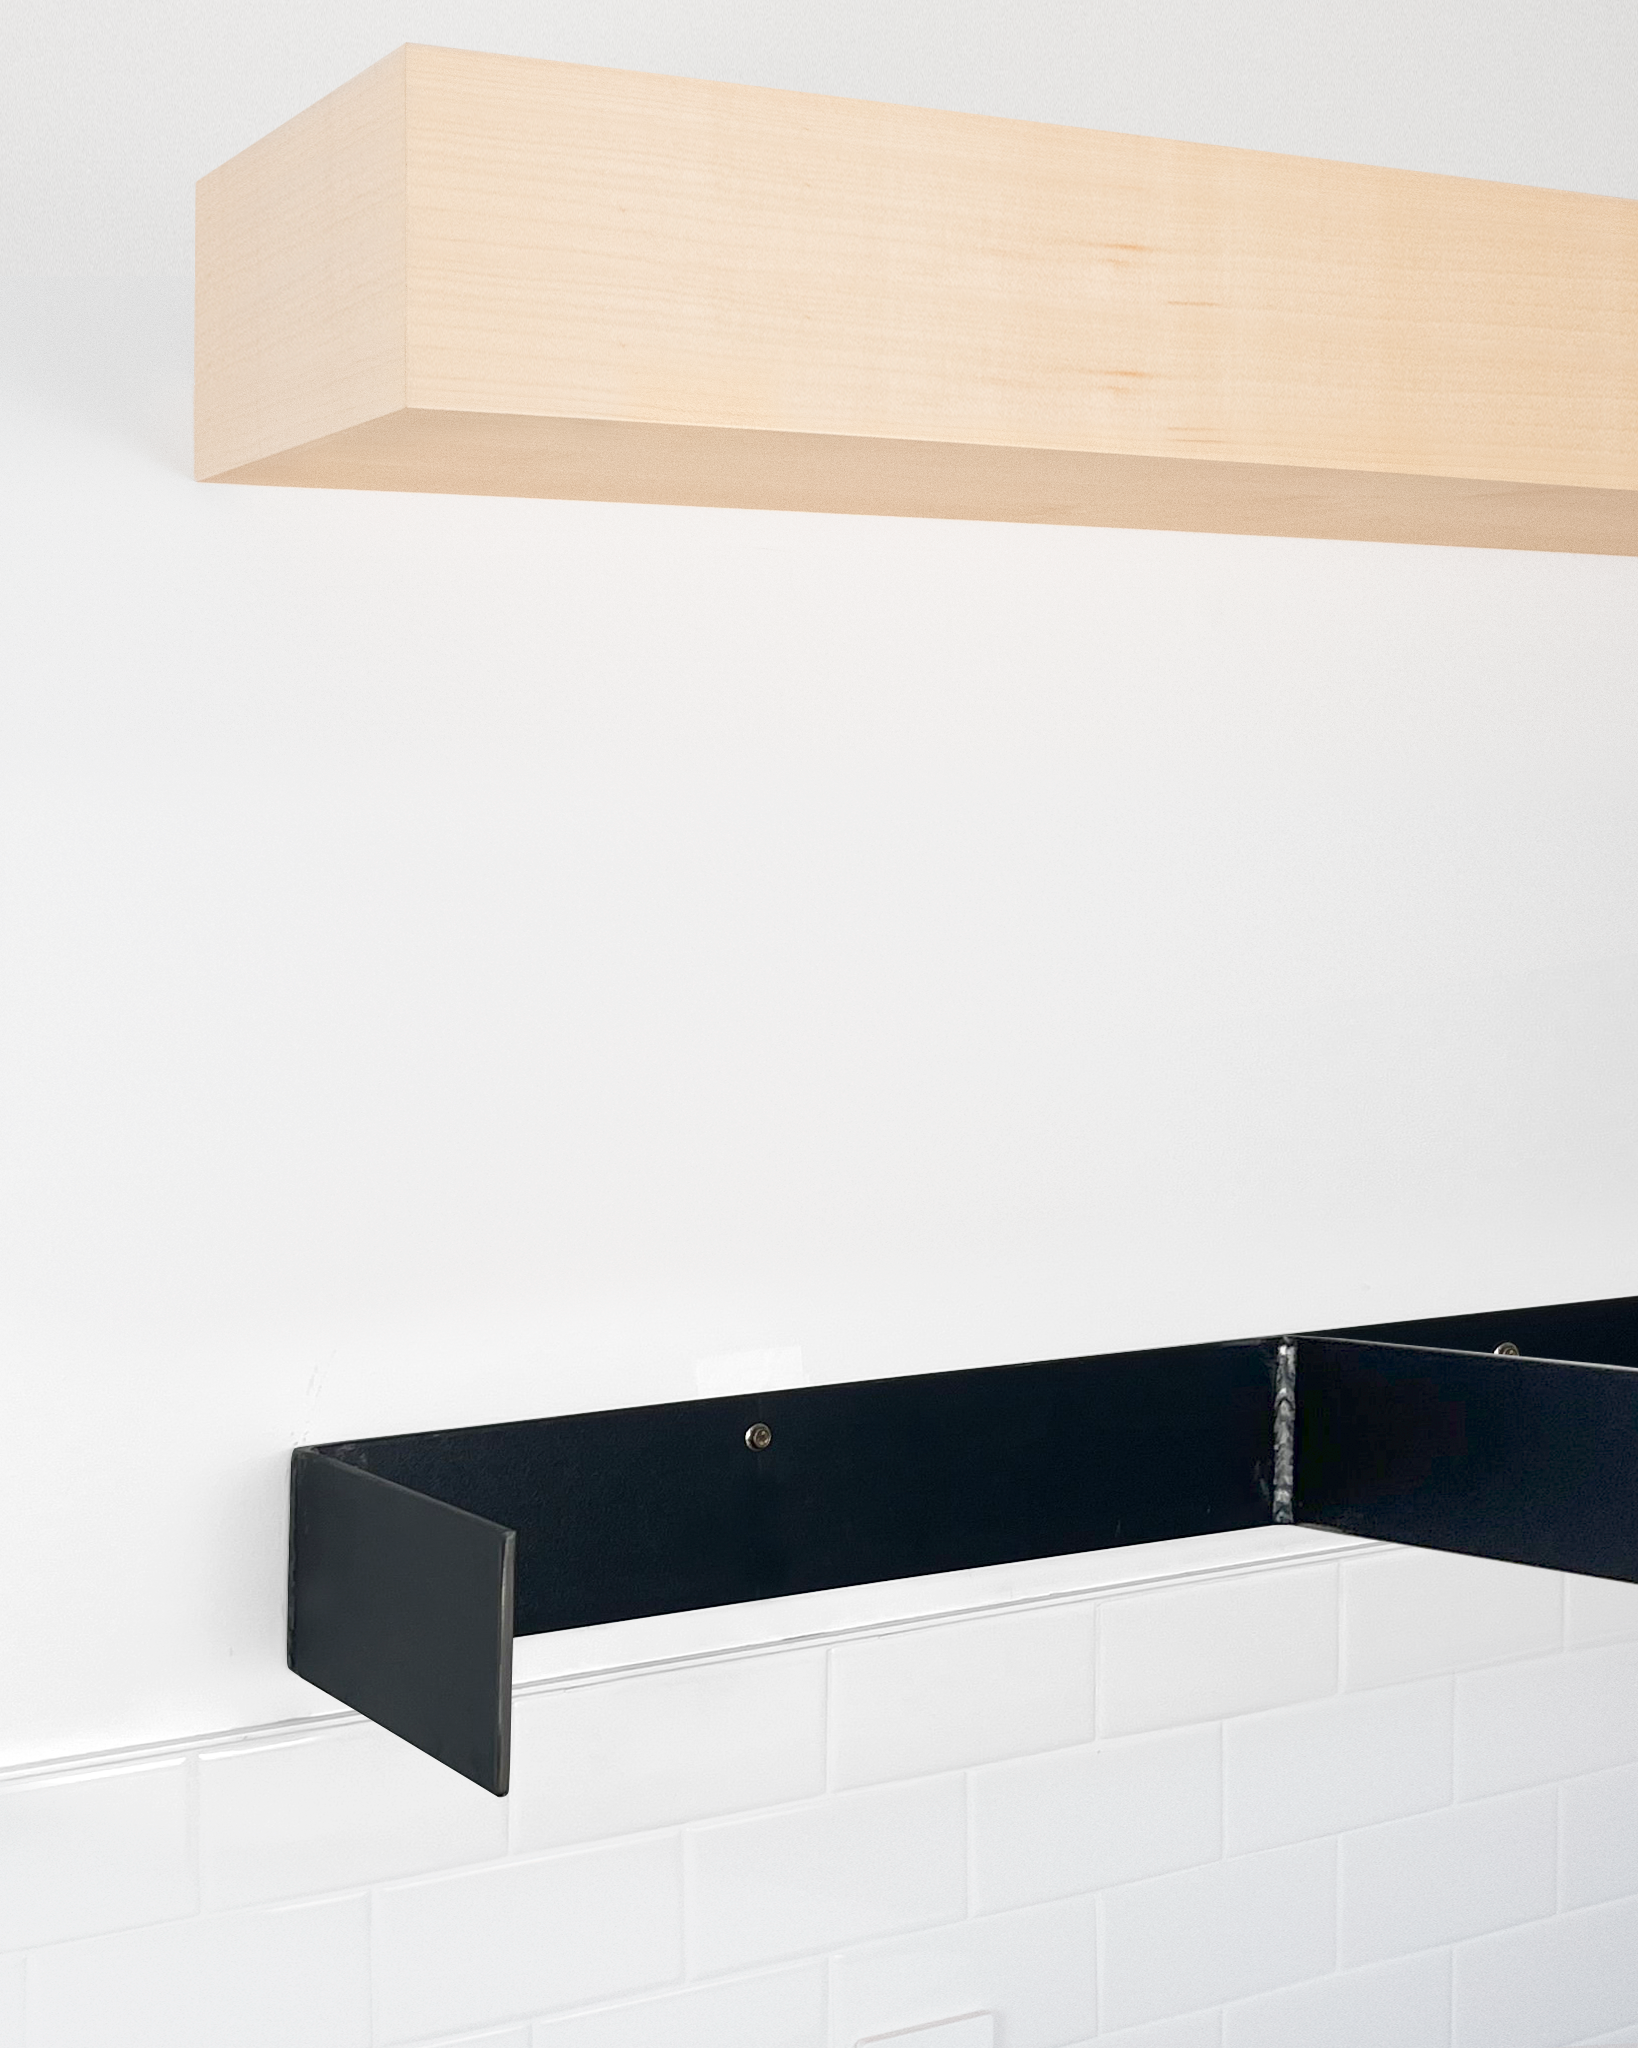 Maple Floating Shelves 4.1-6" thick